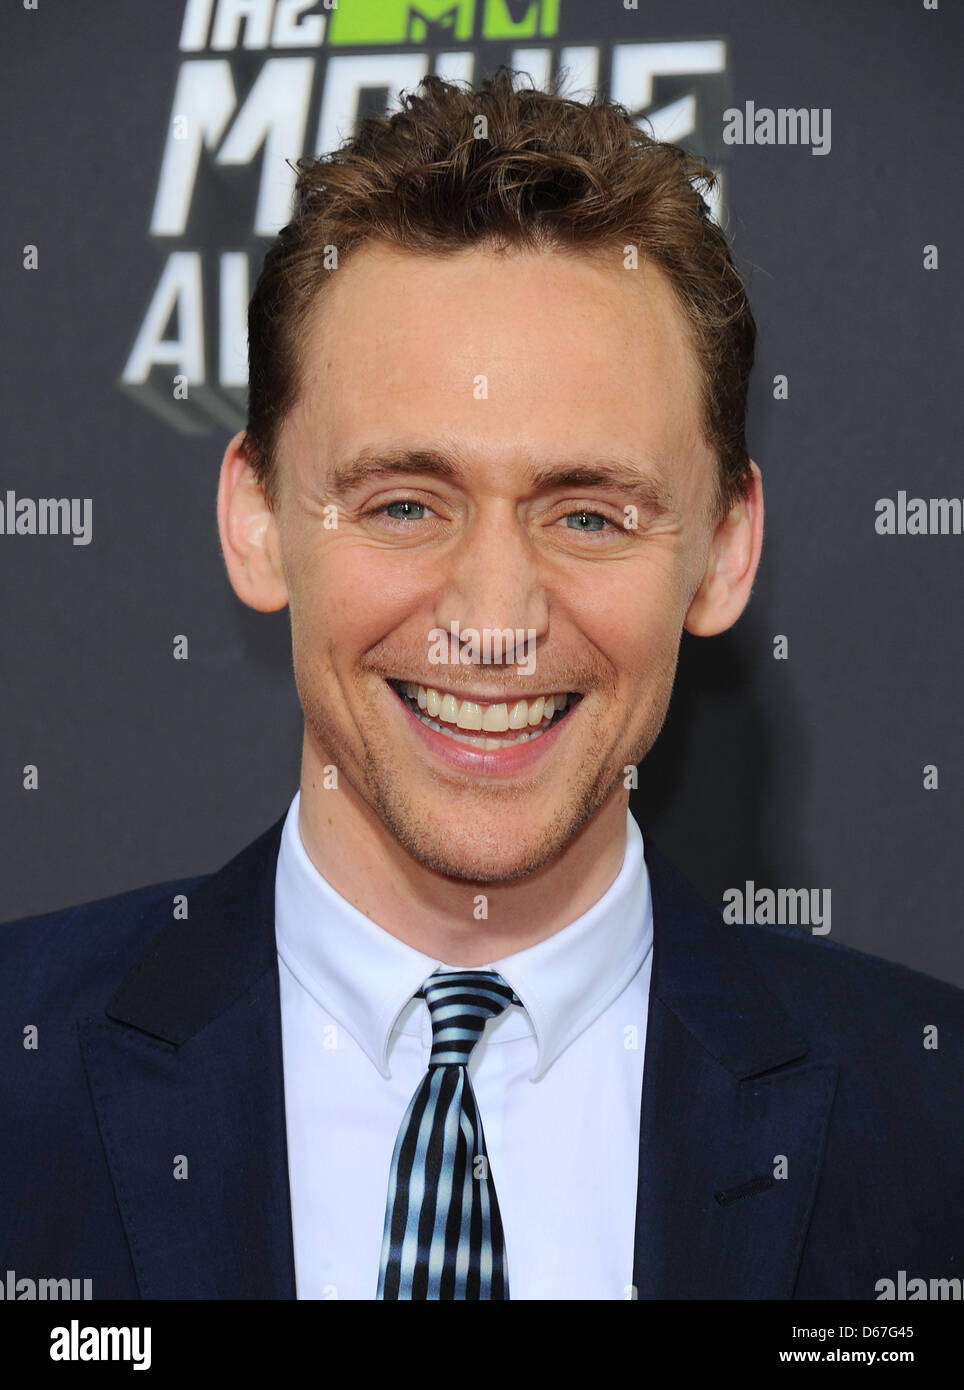 Los Angeles, CA, USA. April 14th 2013. Tom Hiddleston at the MTV Movie Awards in Los Angeles. Credit: Sydney Alford/Alamy Live News Stock Photo